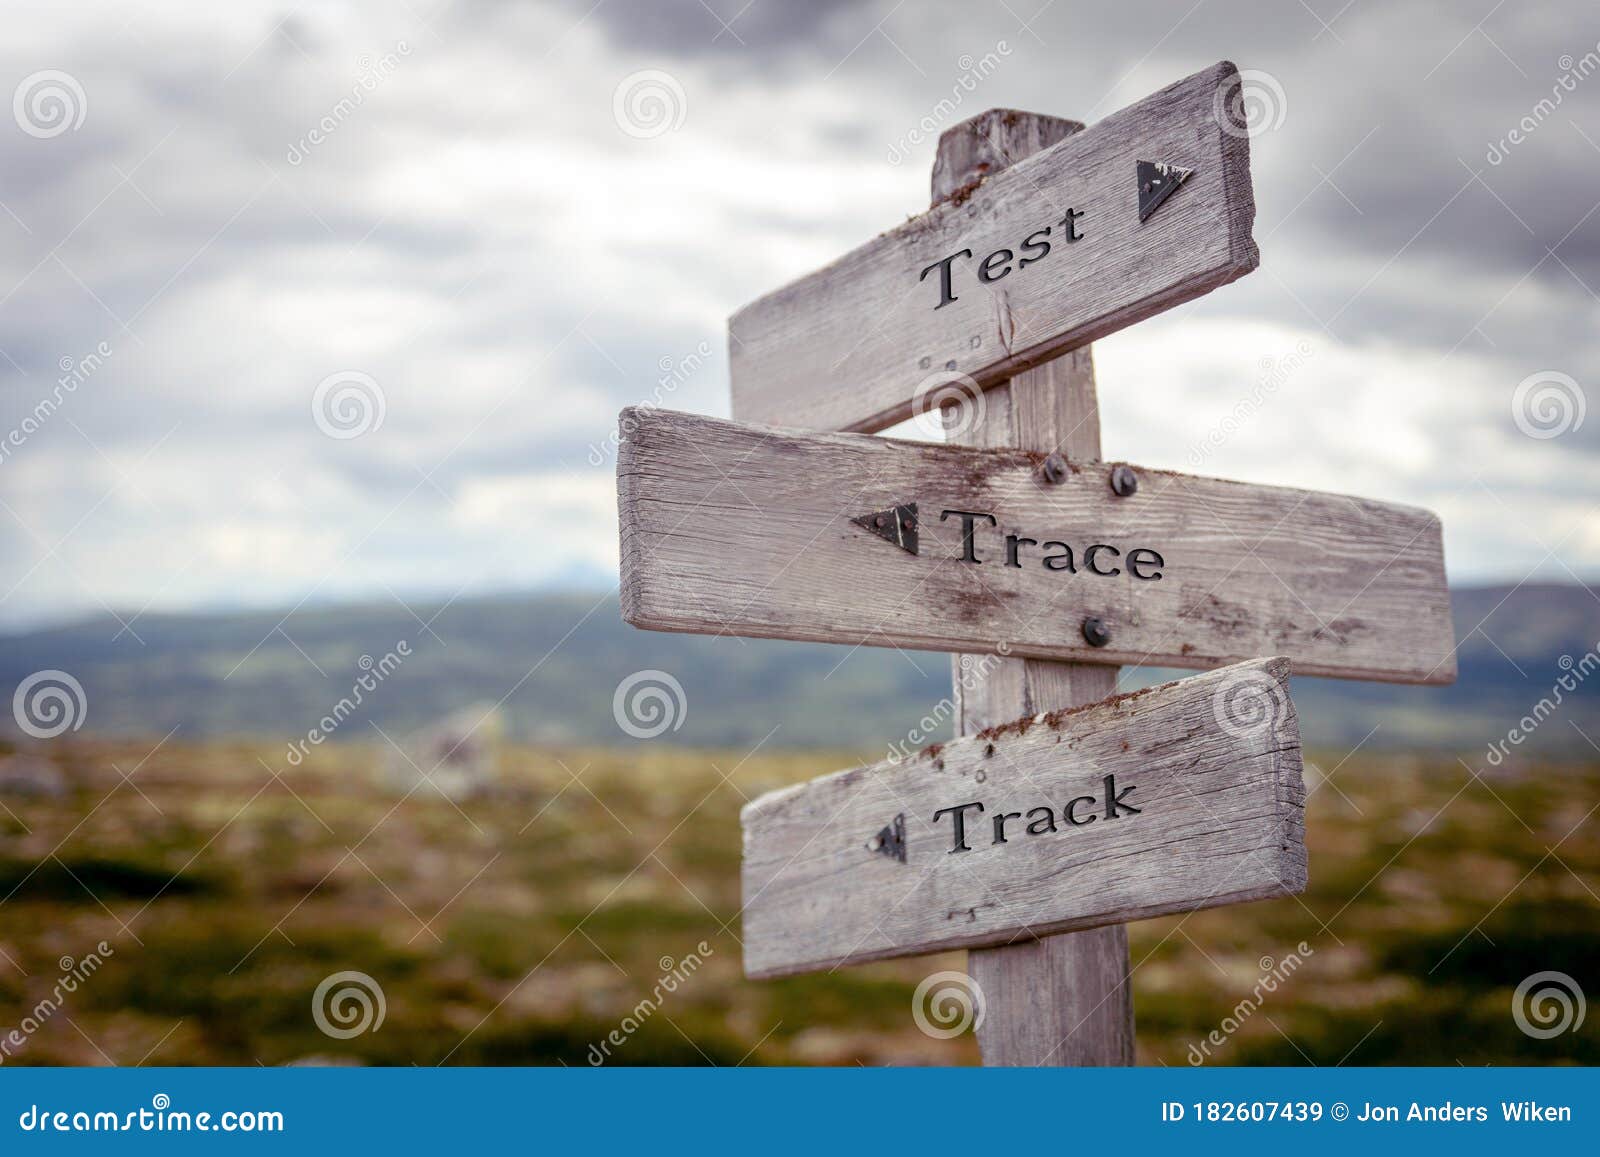 test trace track text engraved on old wooden signpost outdoors in nature